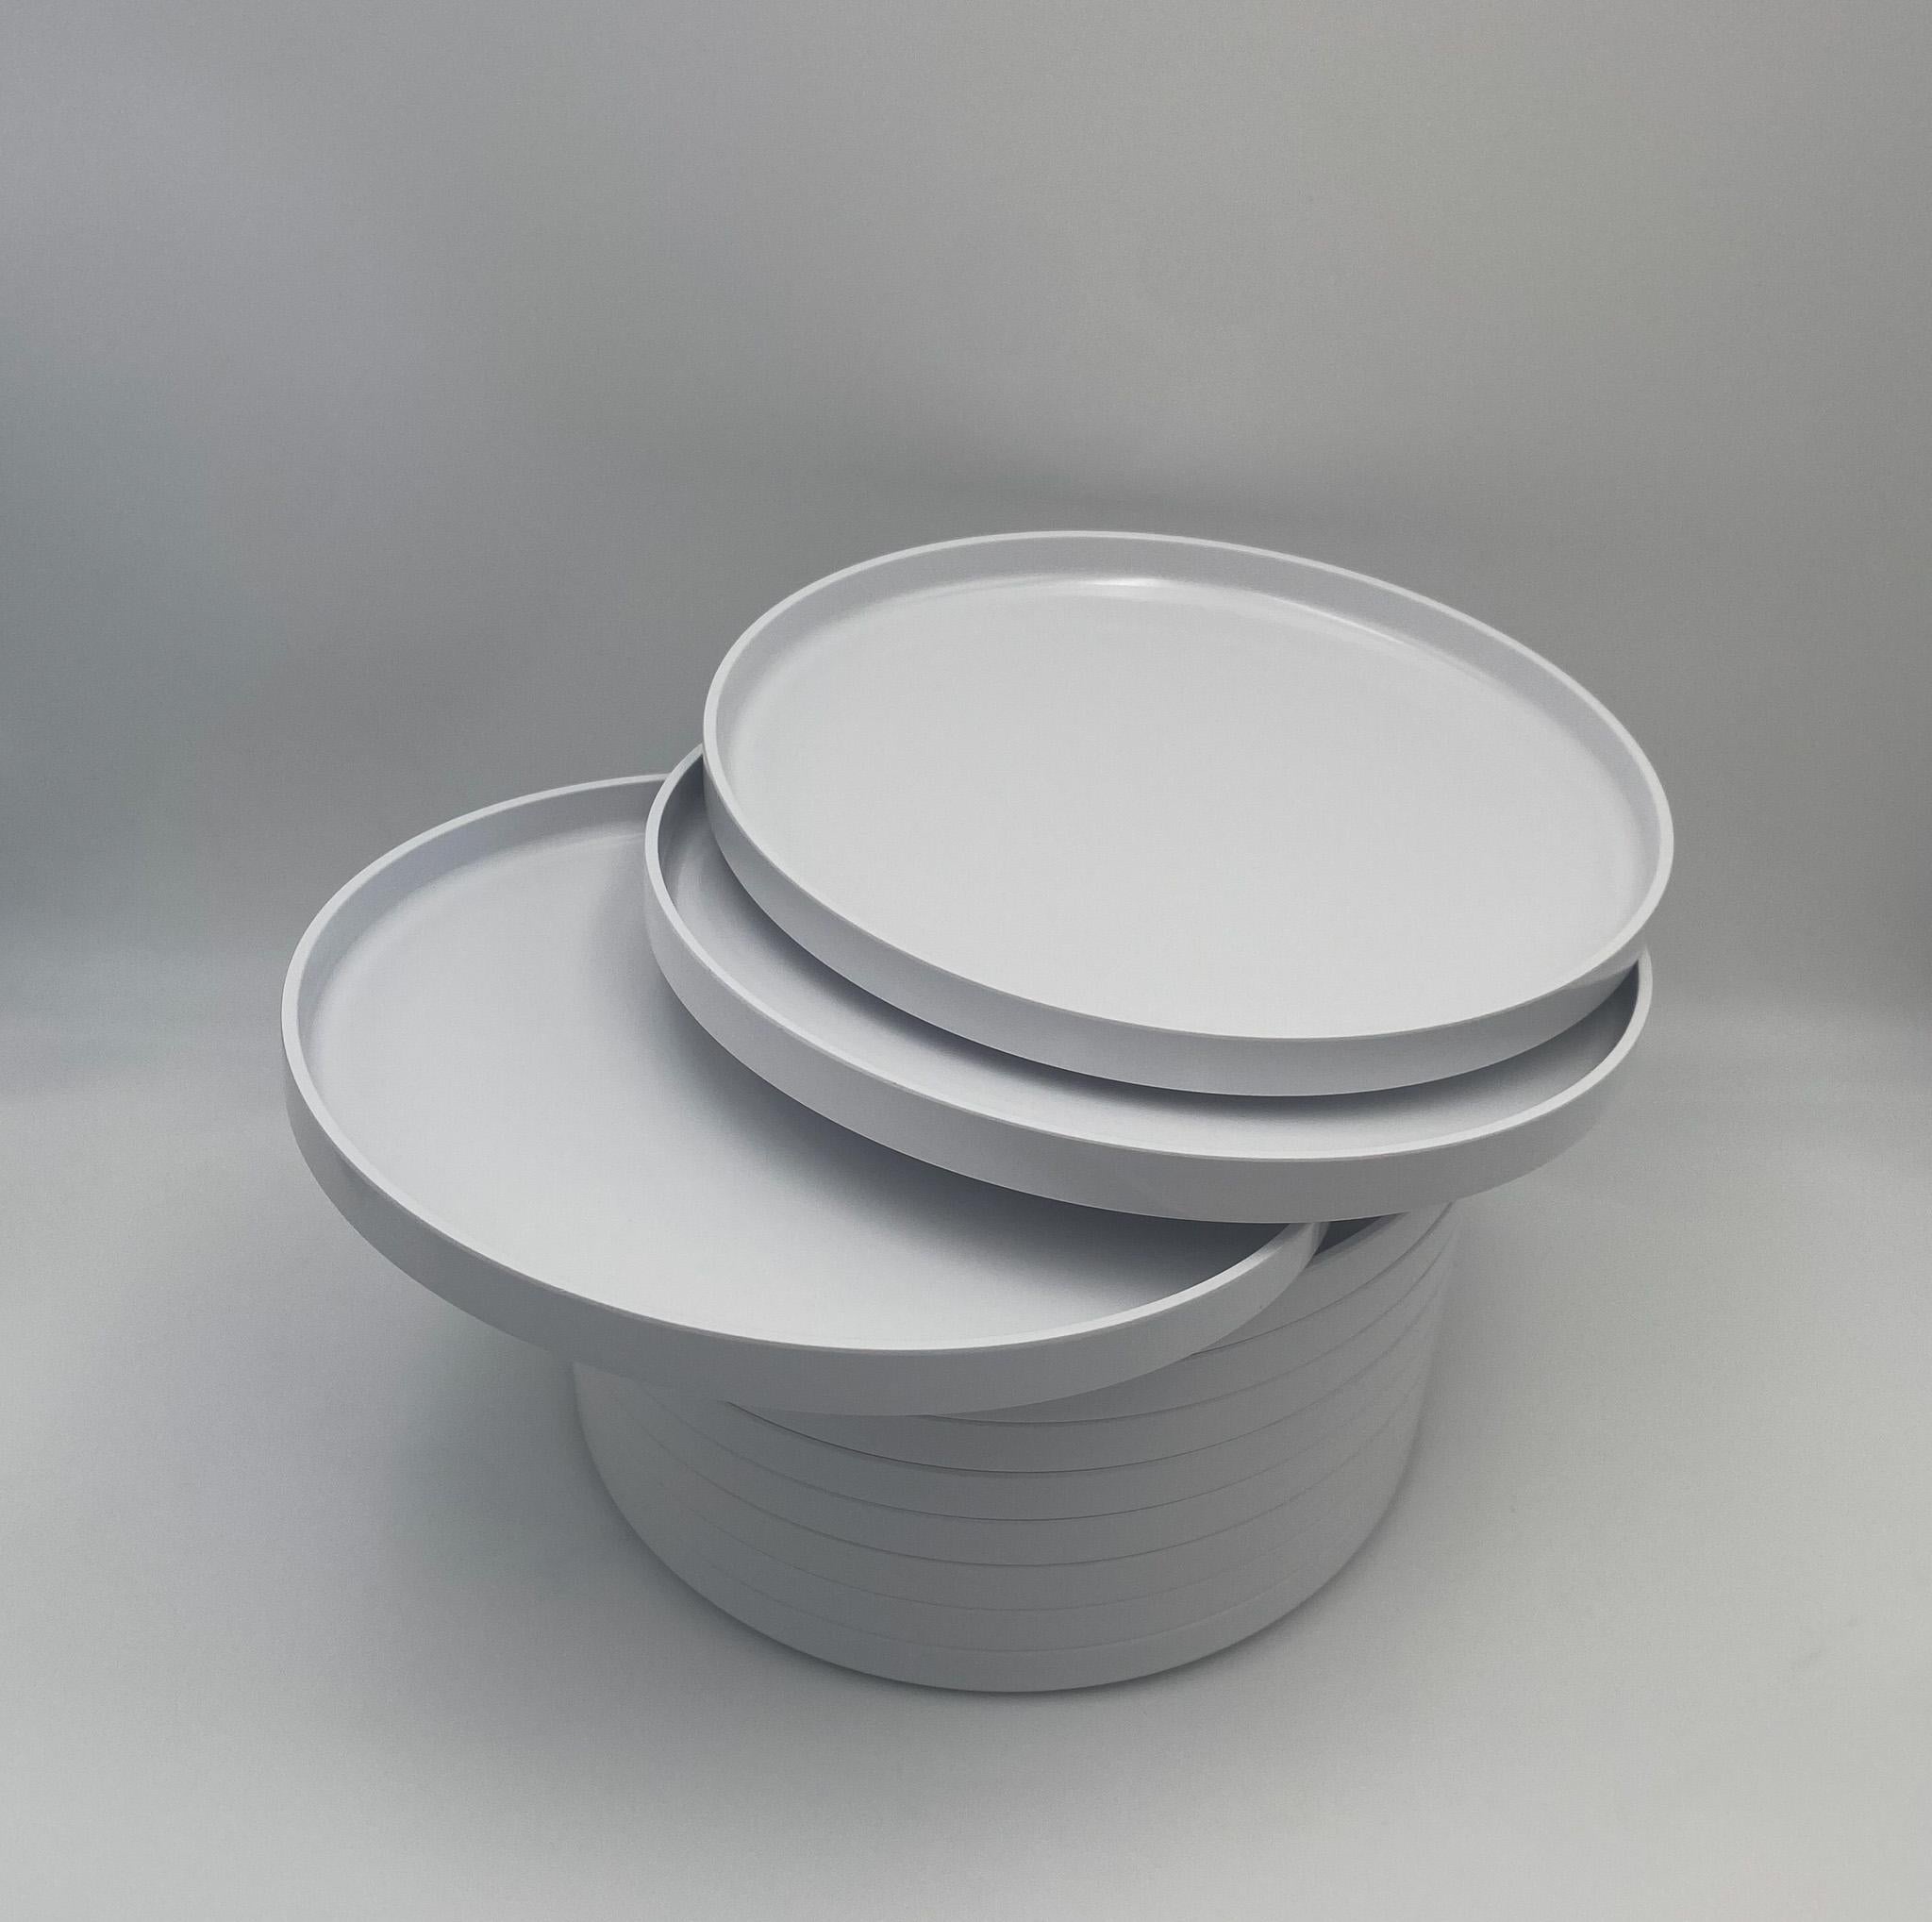 American Massimo Vignelli Stackable Dinnerware for Heller ( 33 pieces ), USA, c.1980